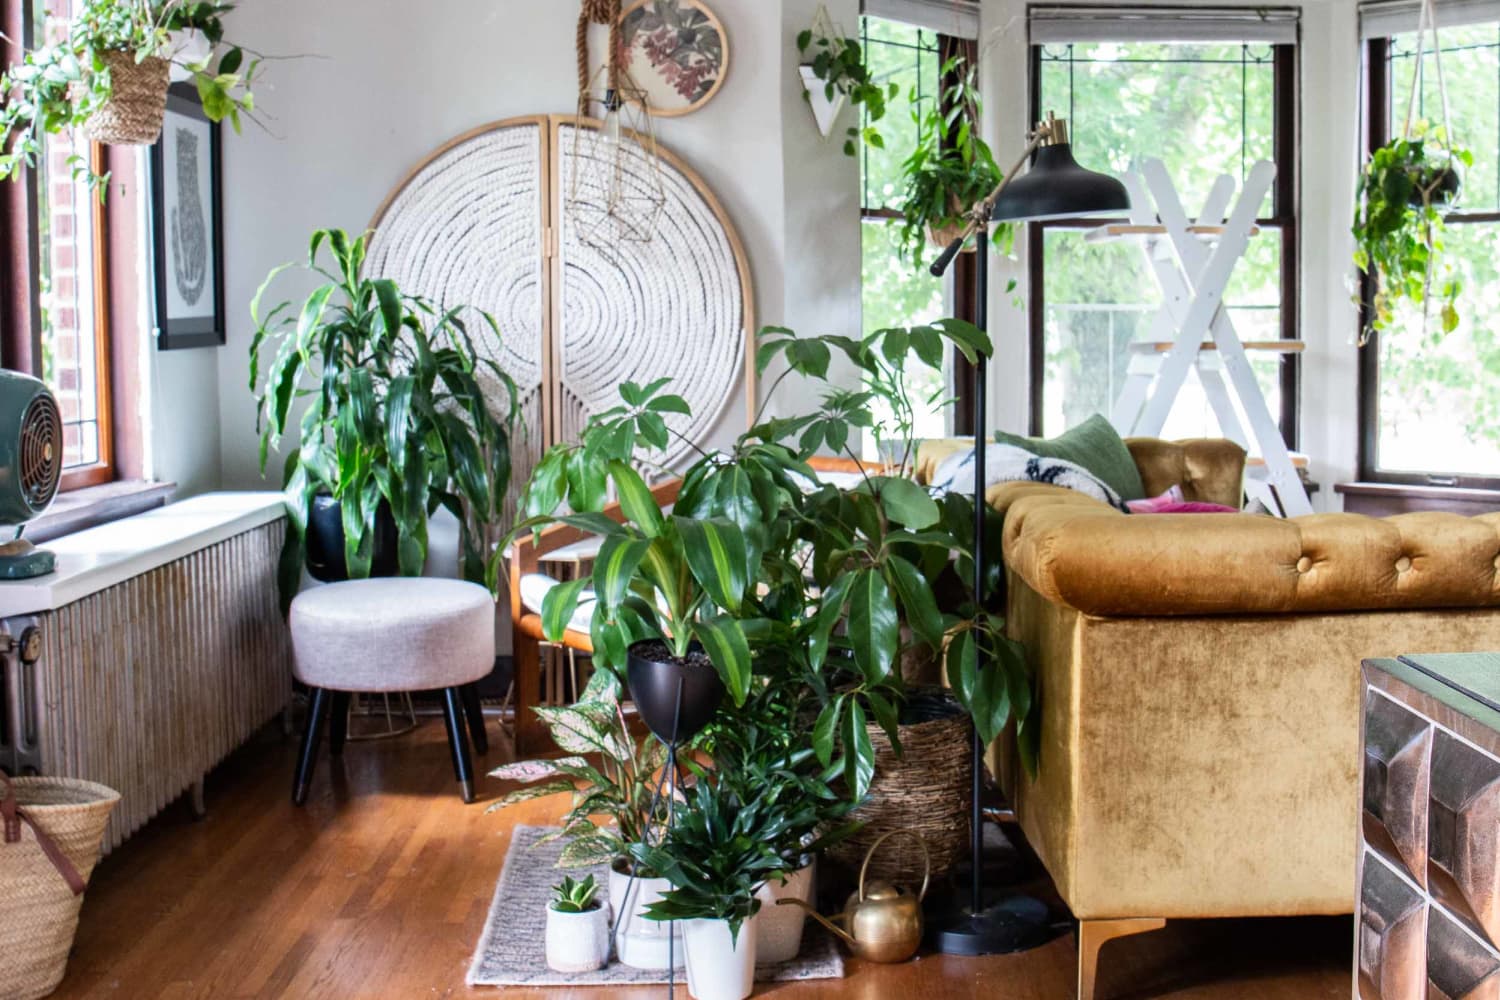 5 Things to Do When Buying New Houseplants | Apartment Therapy